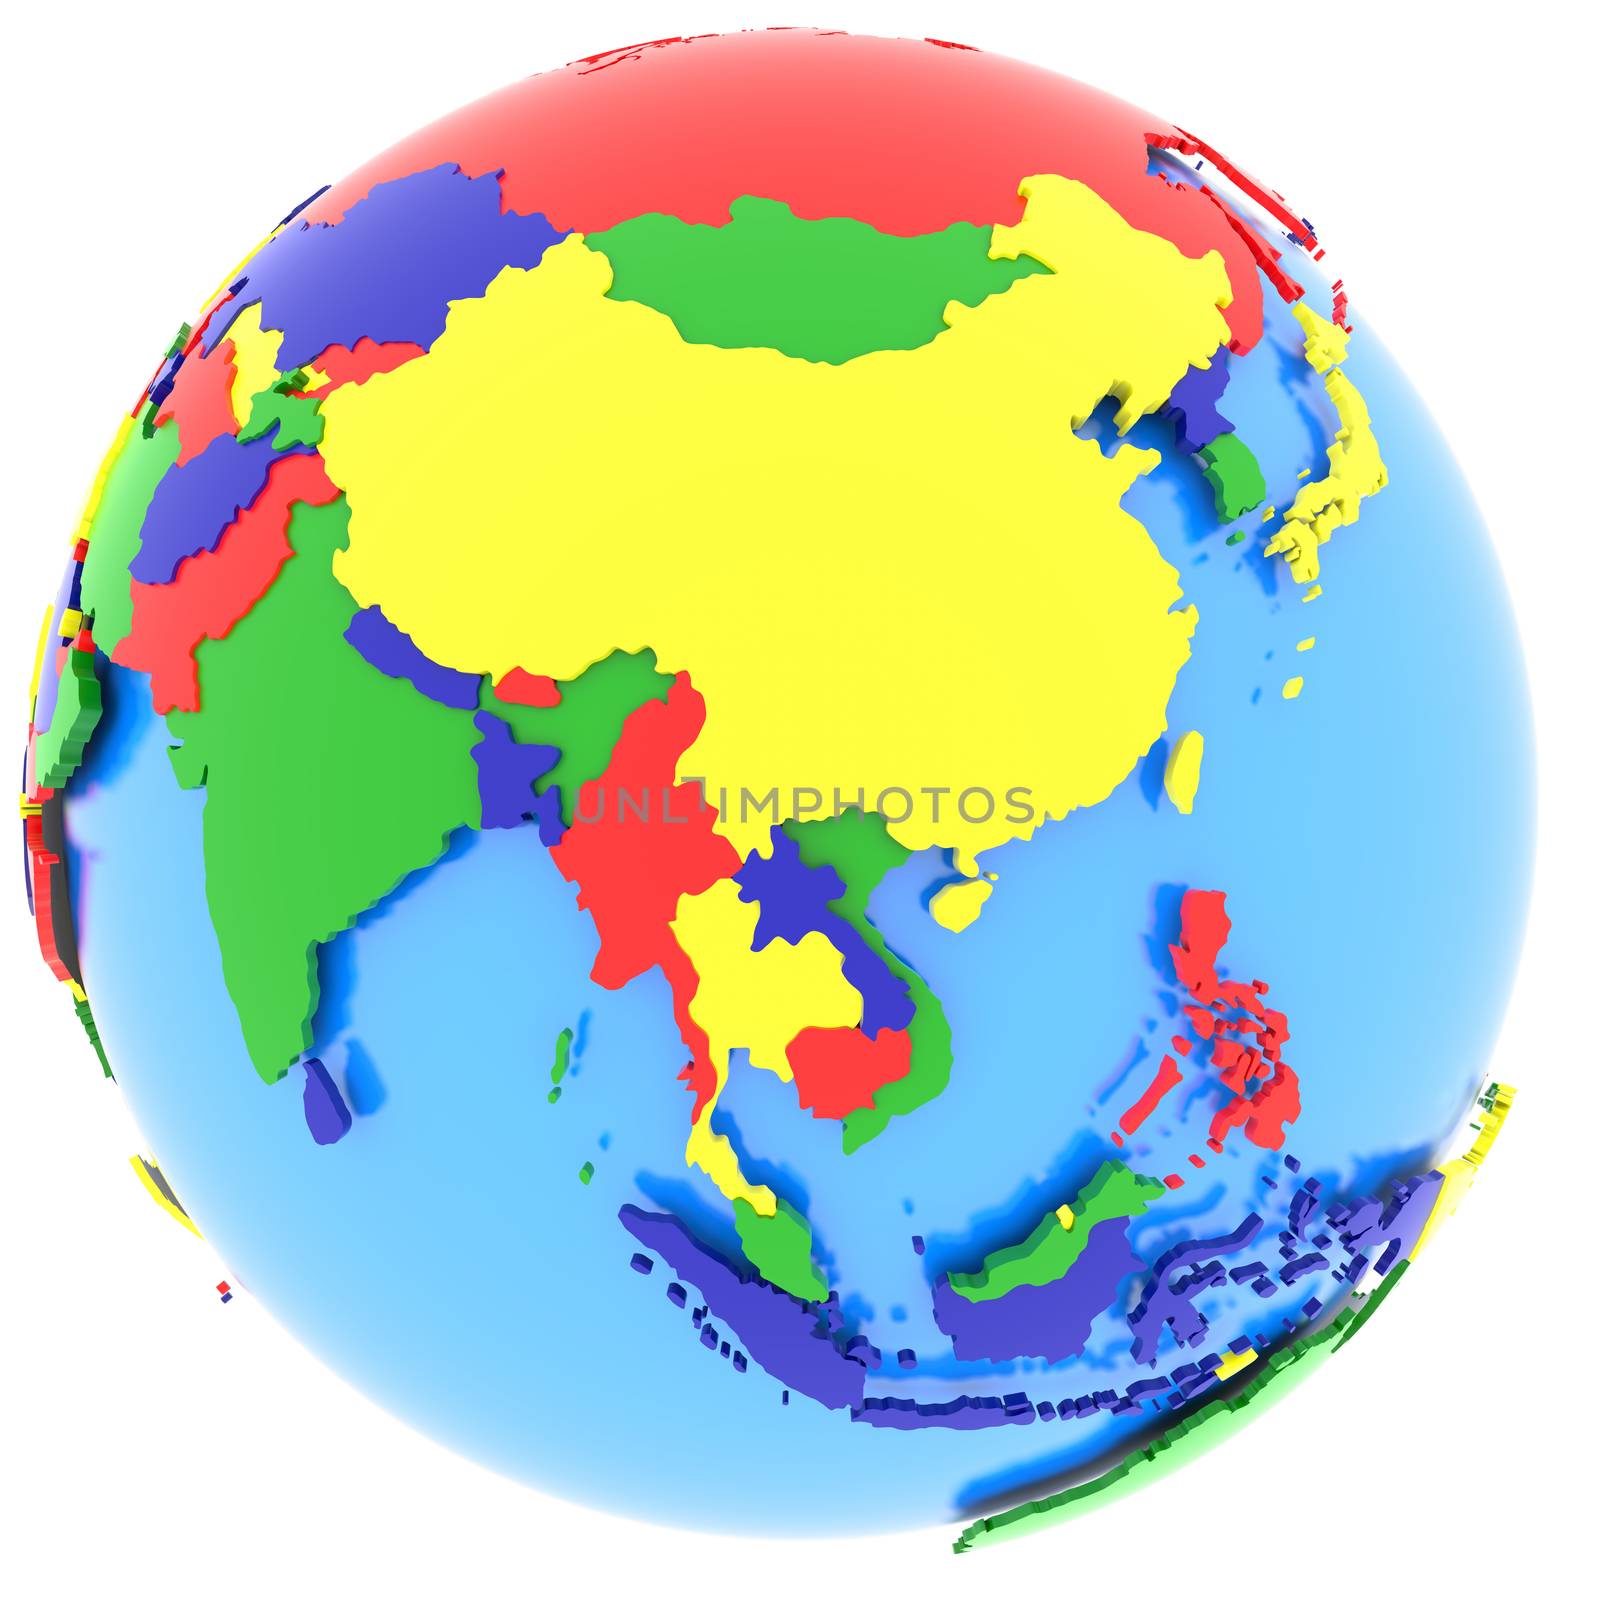 Asia on Earth by Harvepino